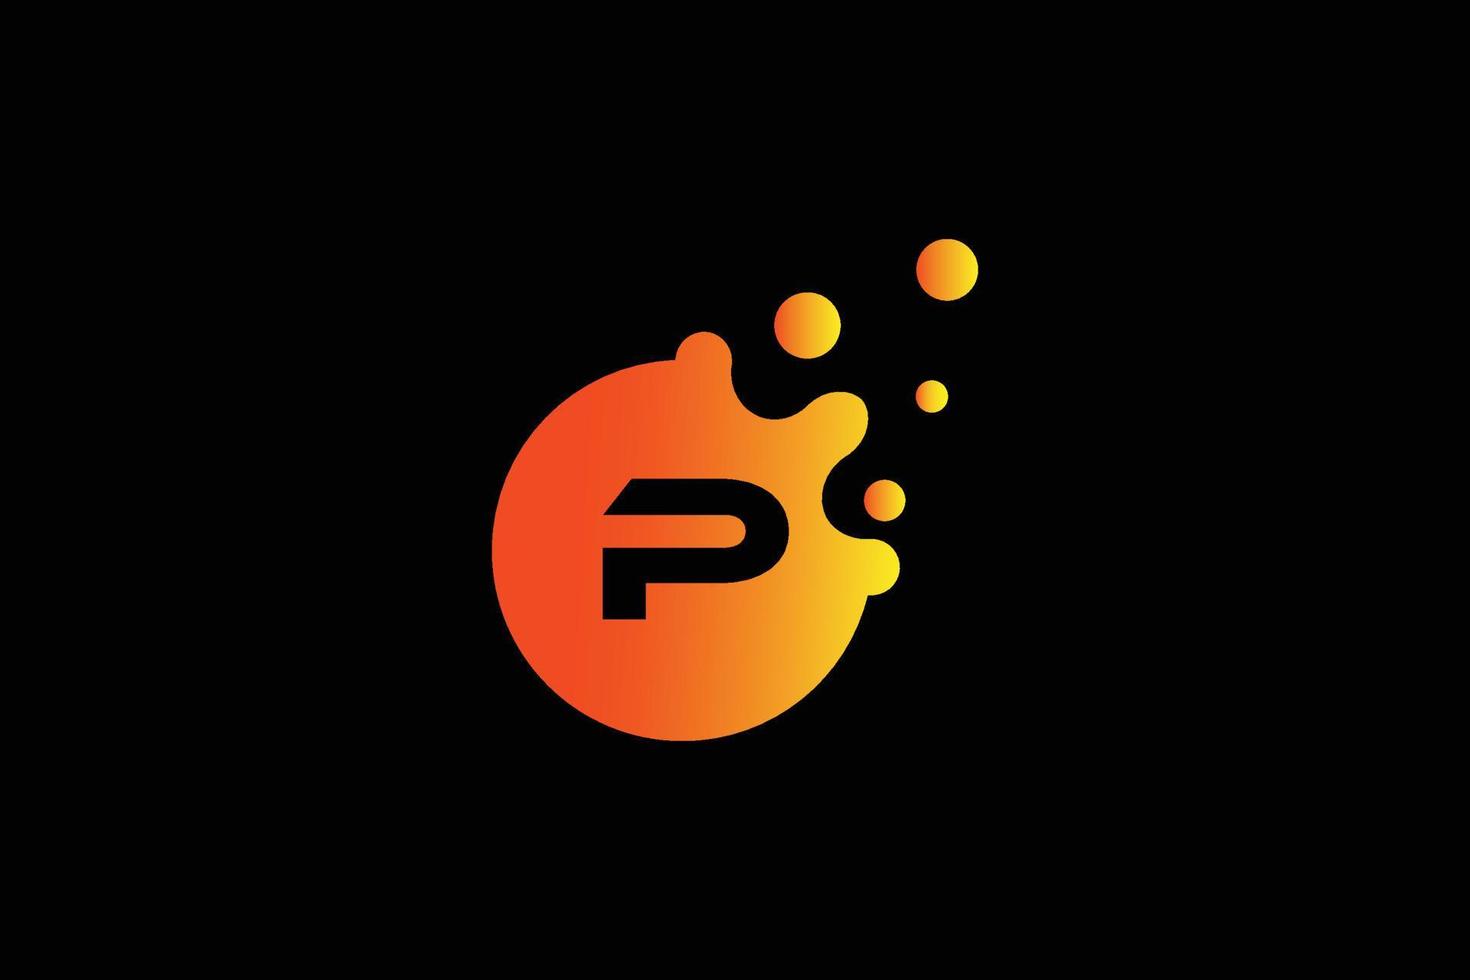 Letter P logo . P letter design vector with dots vector illustration . Letter mark logo with orange and yellow gradient.